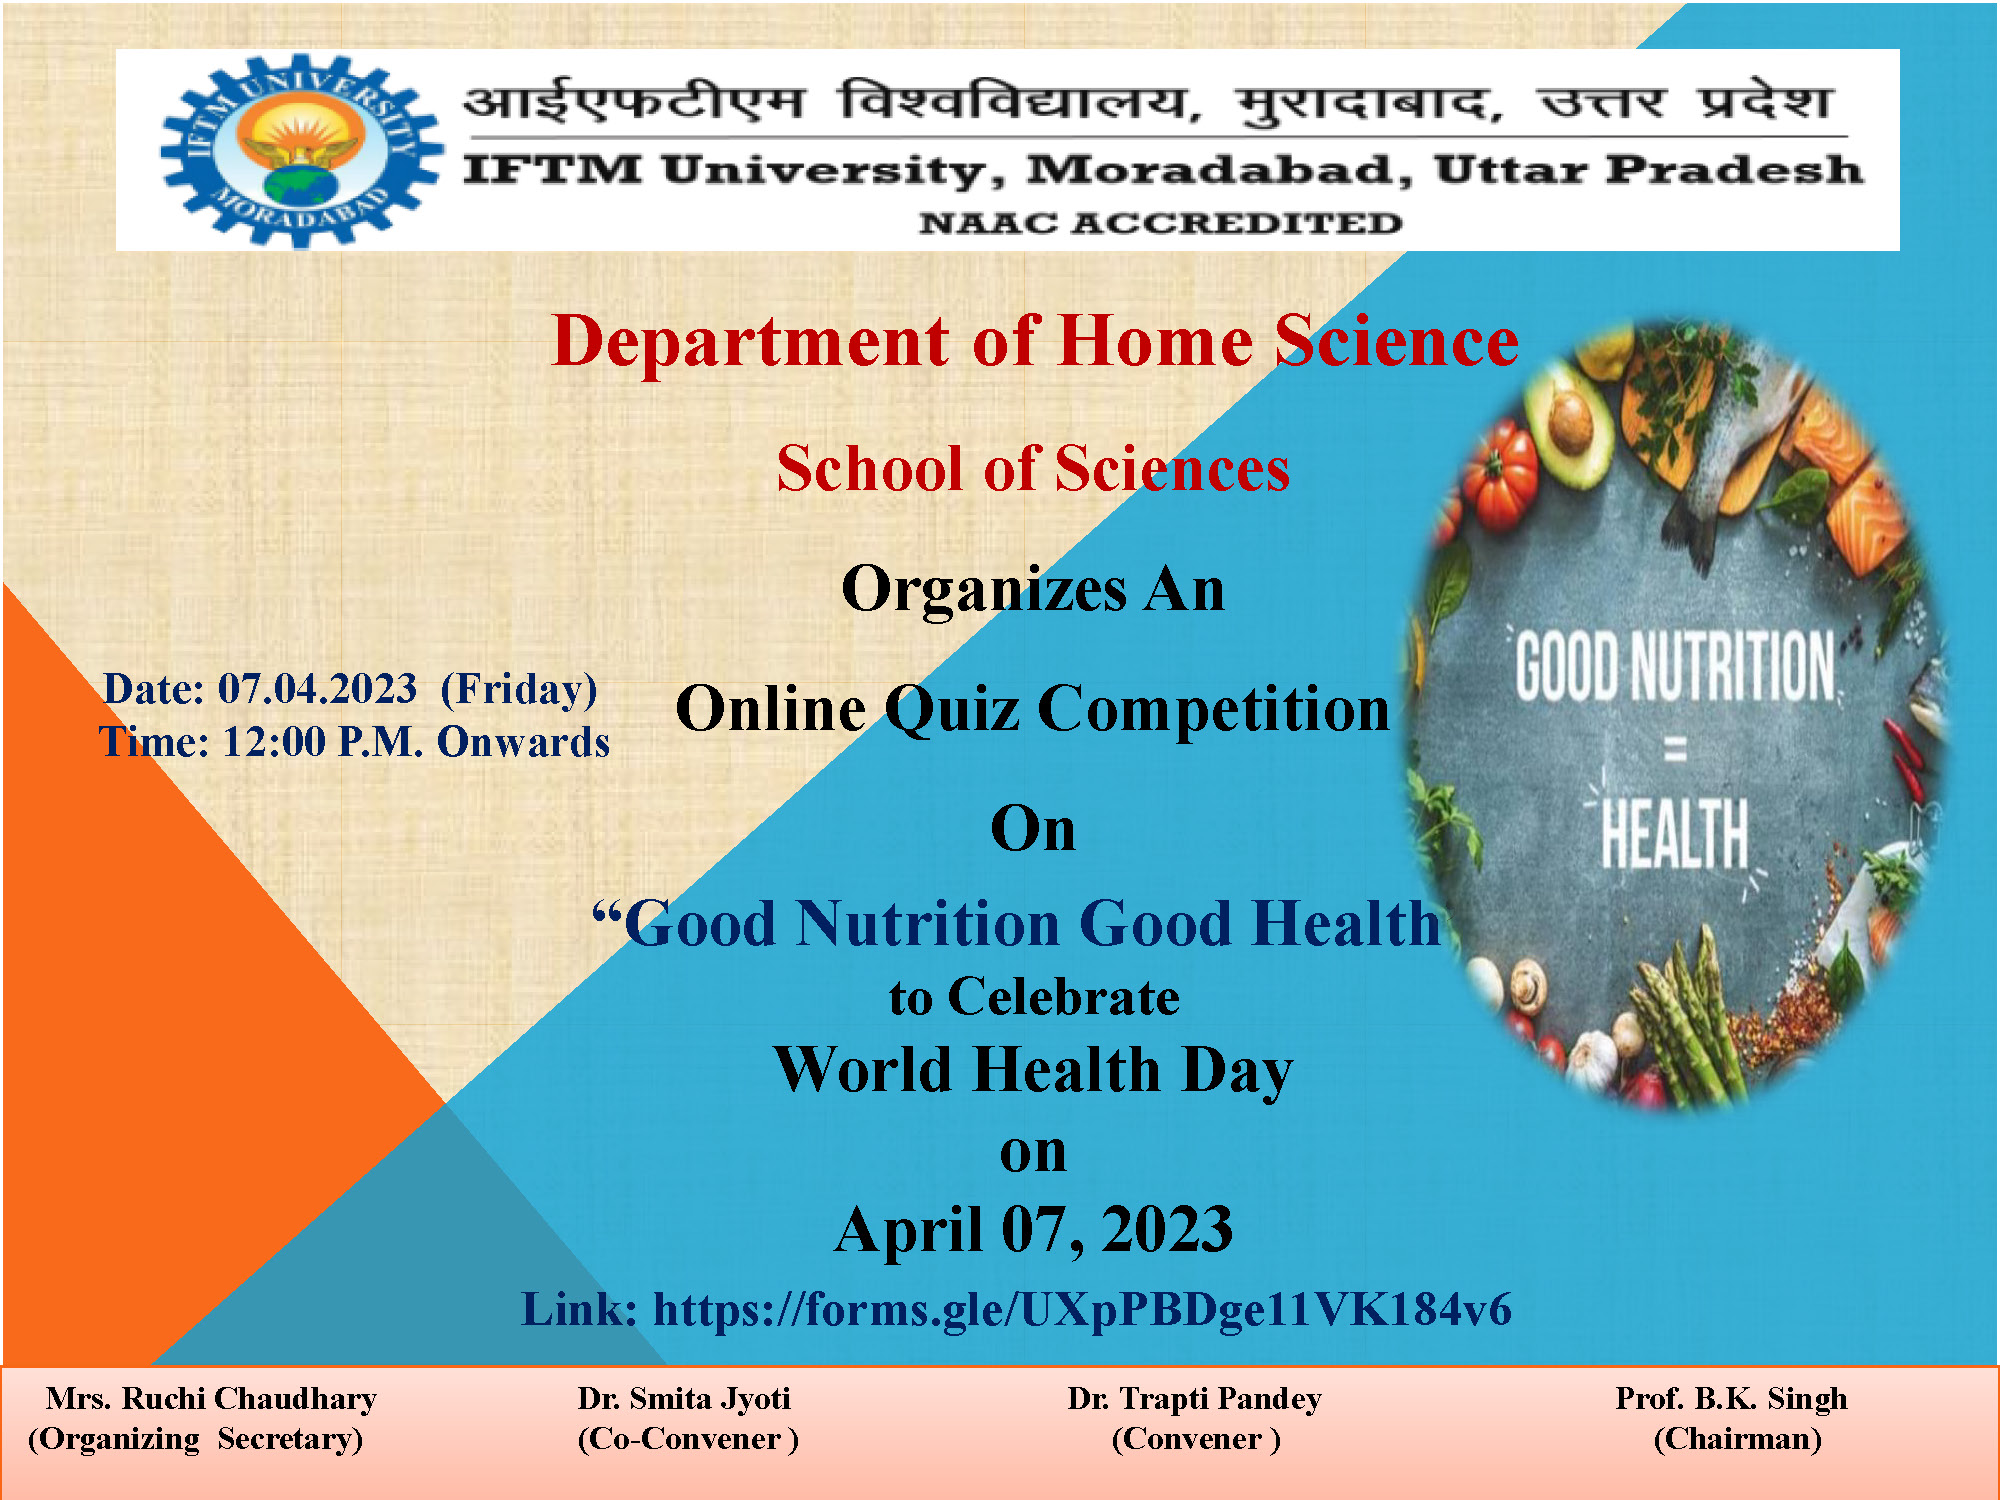 Online Quiz Competition on Good Nutrition Good Health to Celebrate World Health Day